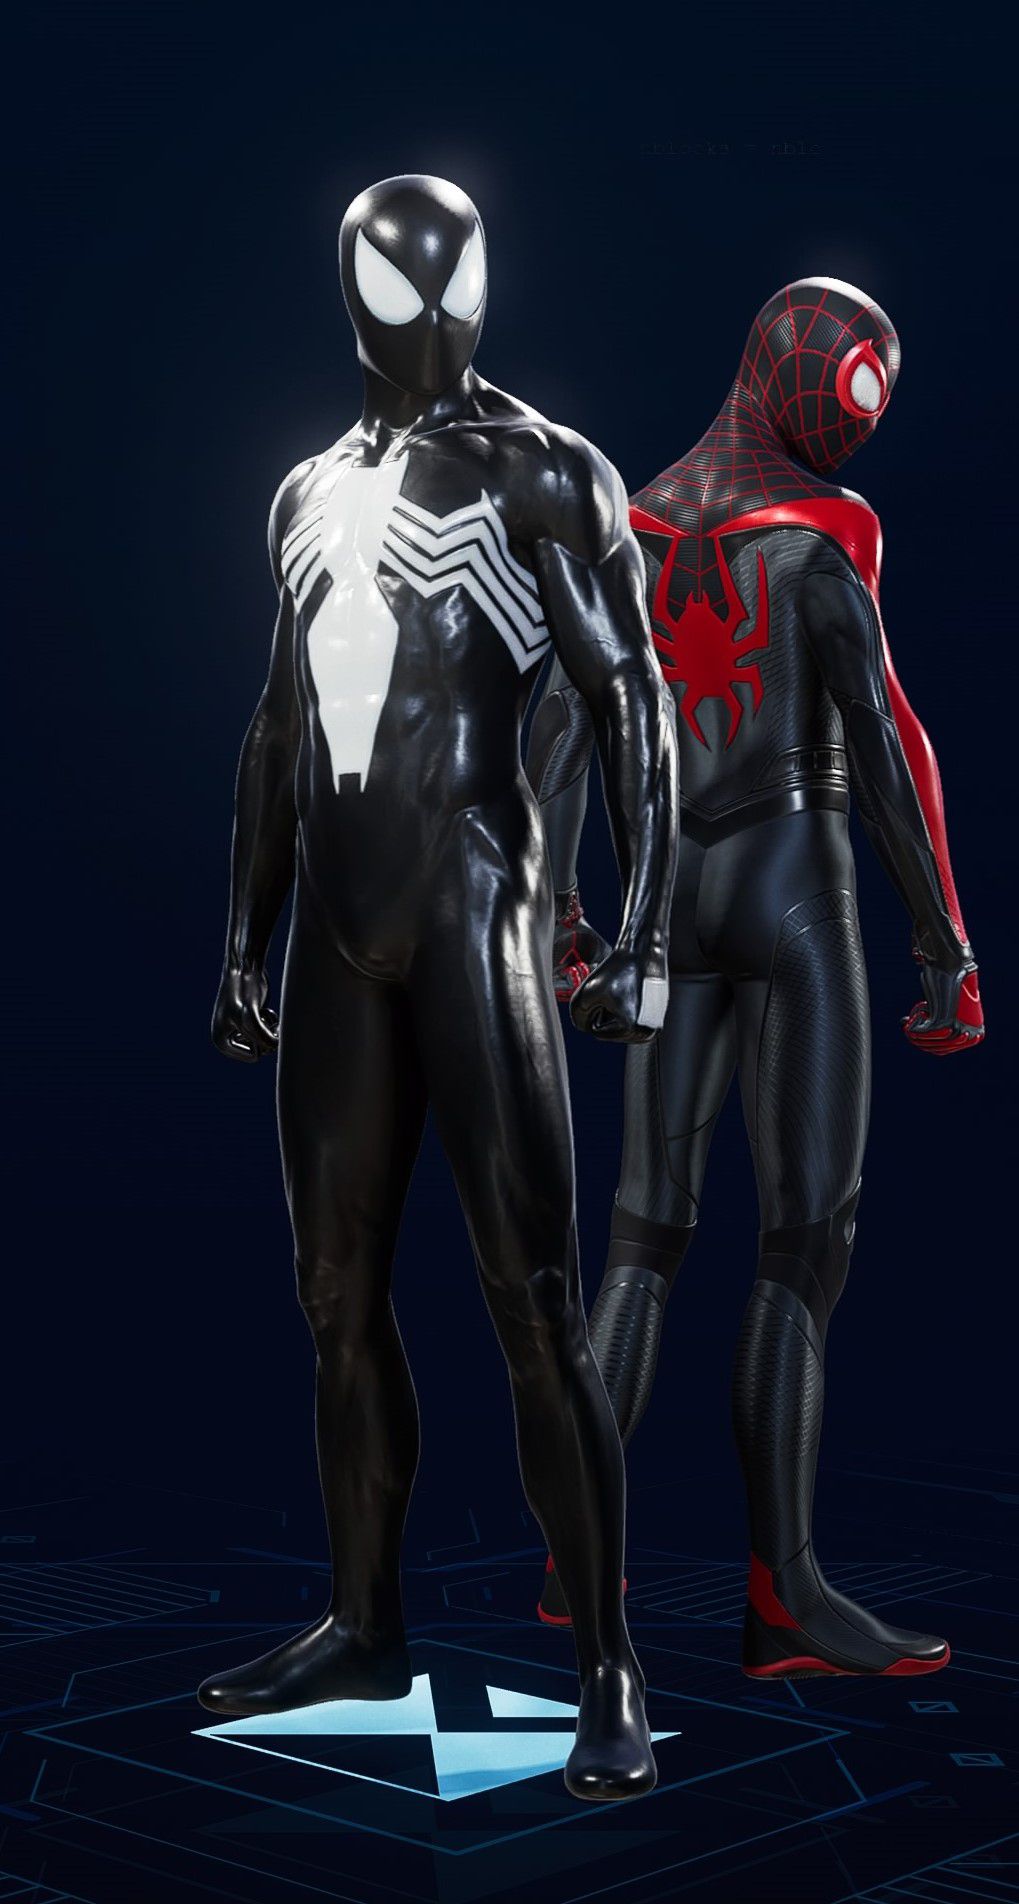 Peter Parker stands in his Classic Black Suit in the suit selection screen of Spider-Man 2.